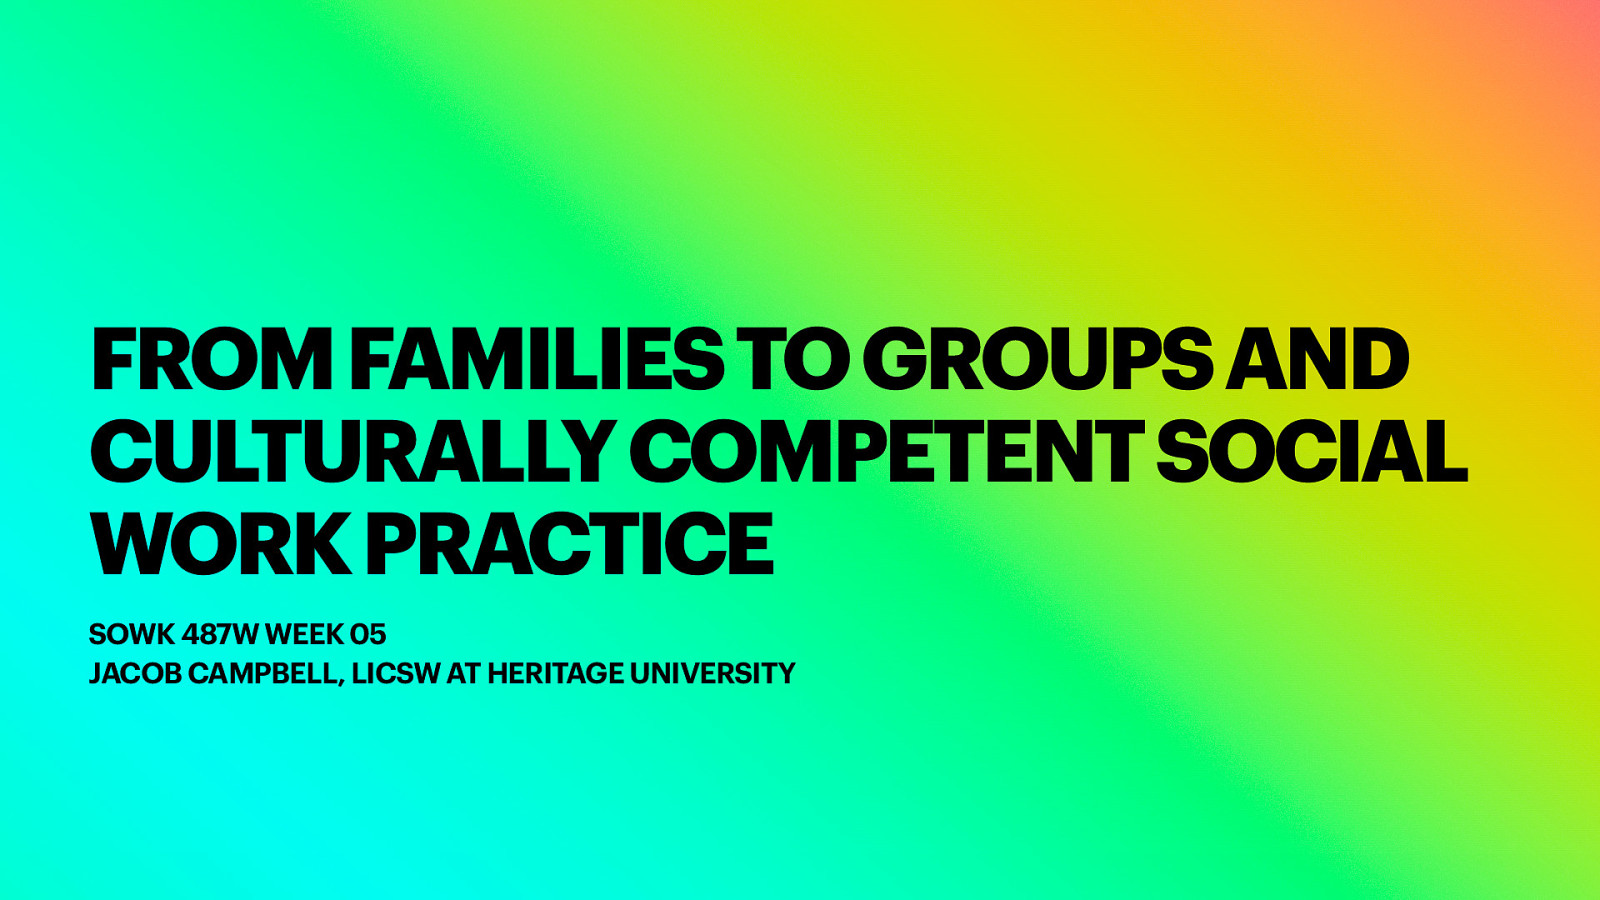 Spring 2023 SOWK 487w Week 05 - From Families to Groups and Culturally Competent Social Work Practice